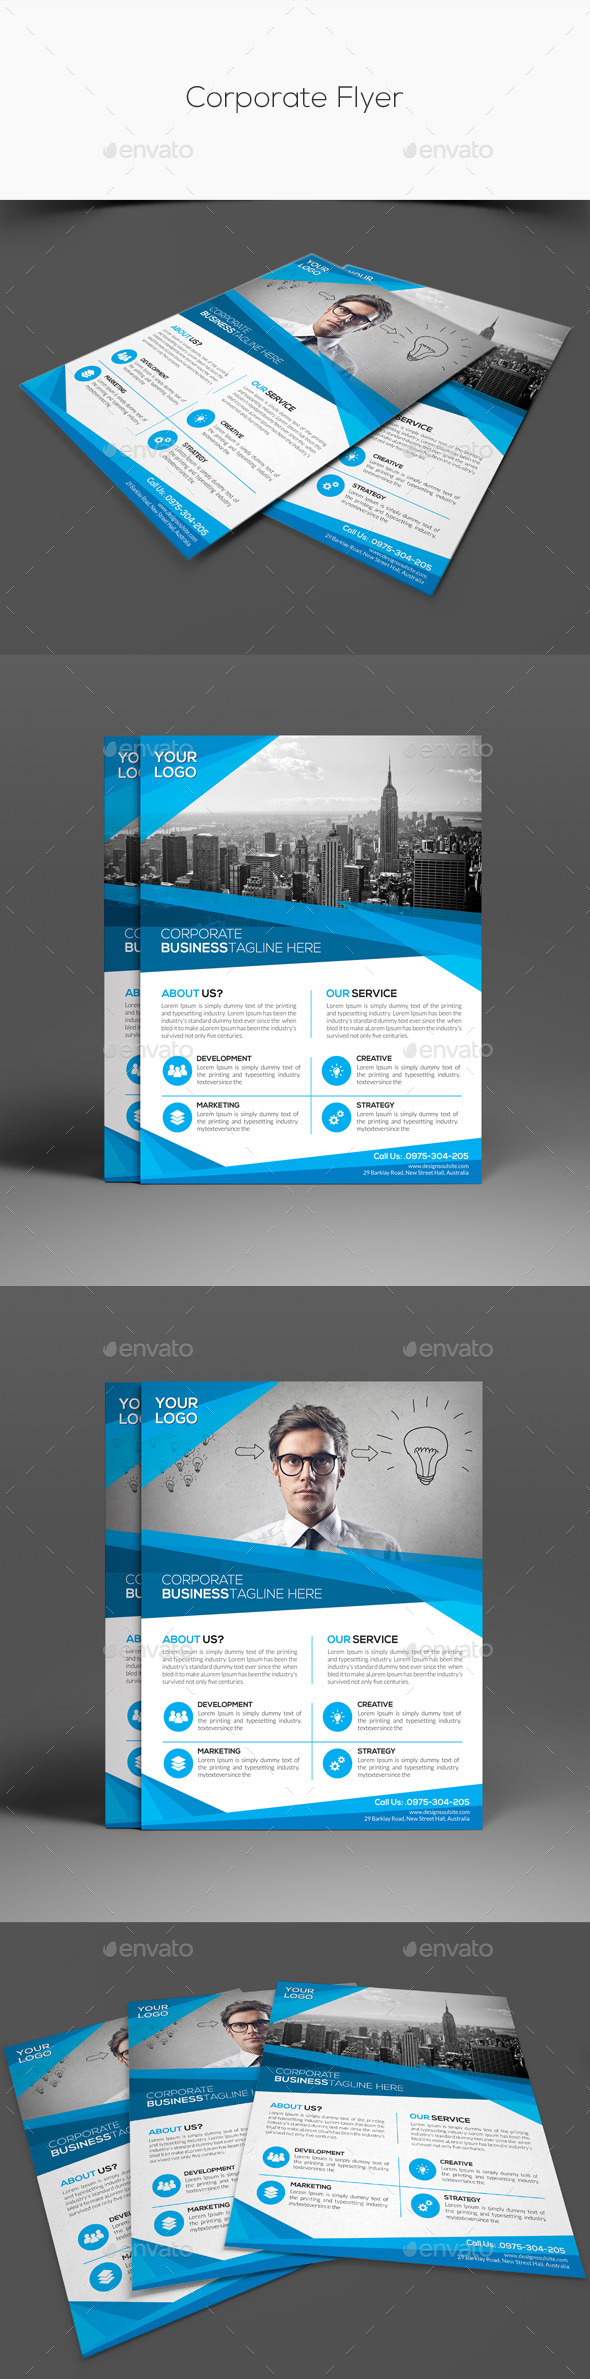 Corporate Flyer Templates From Graphicriver